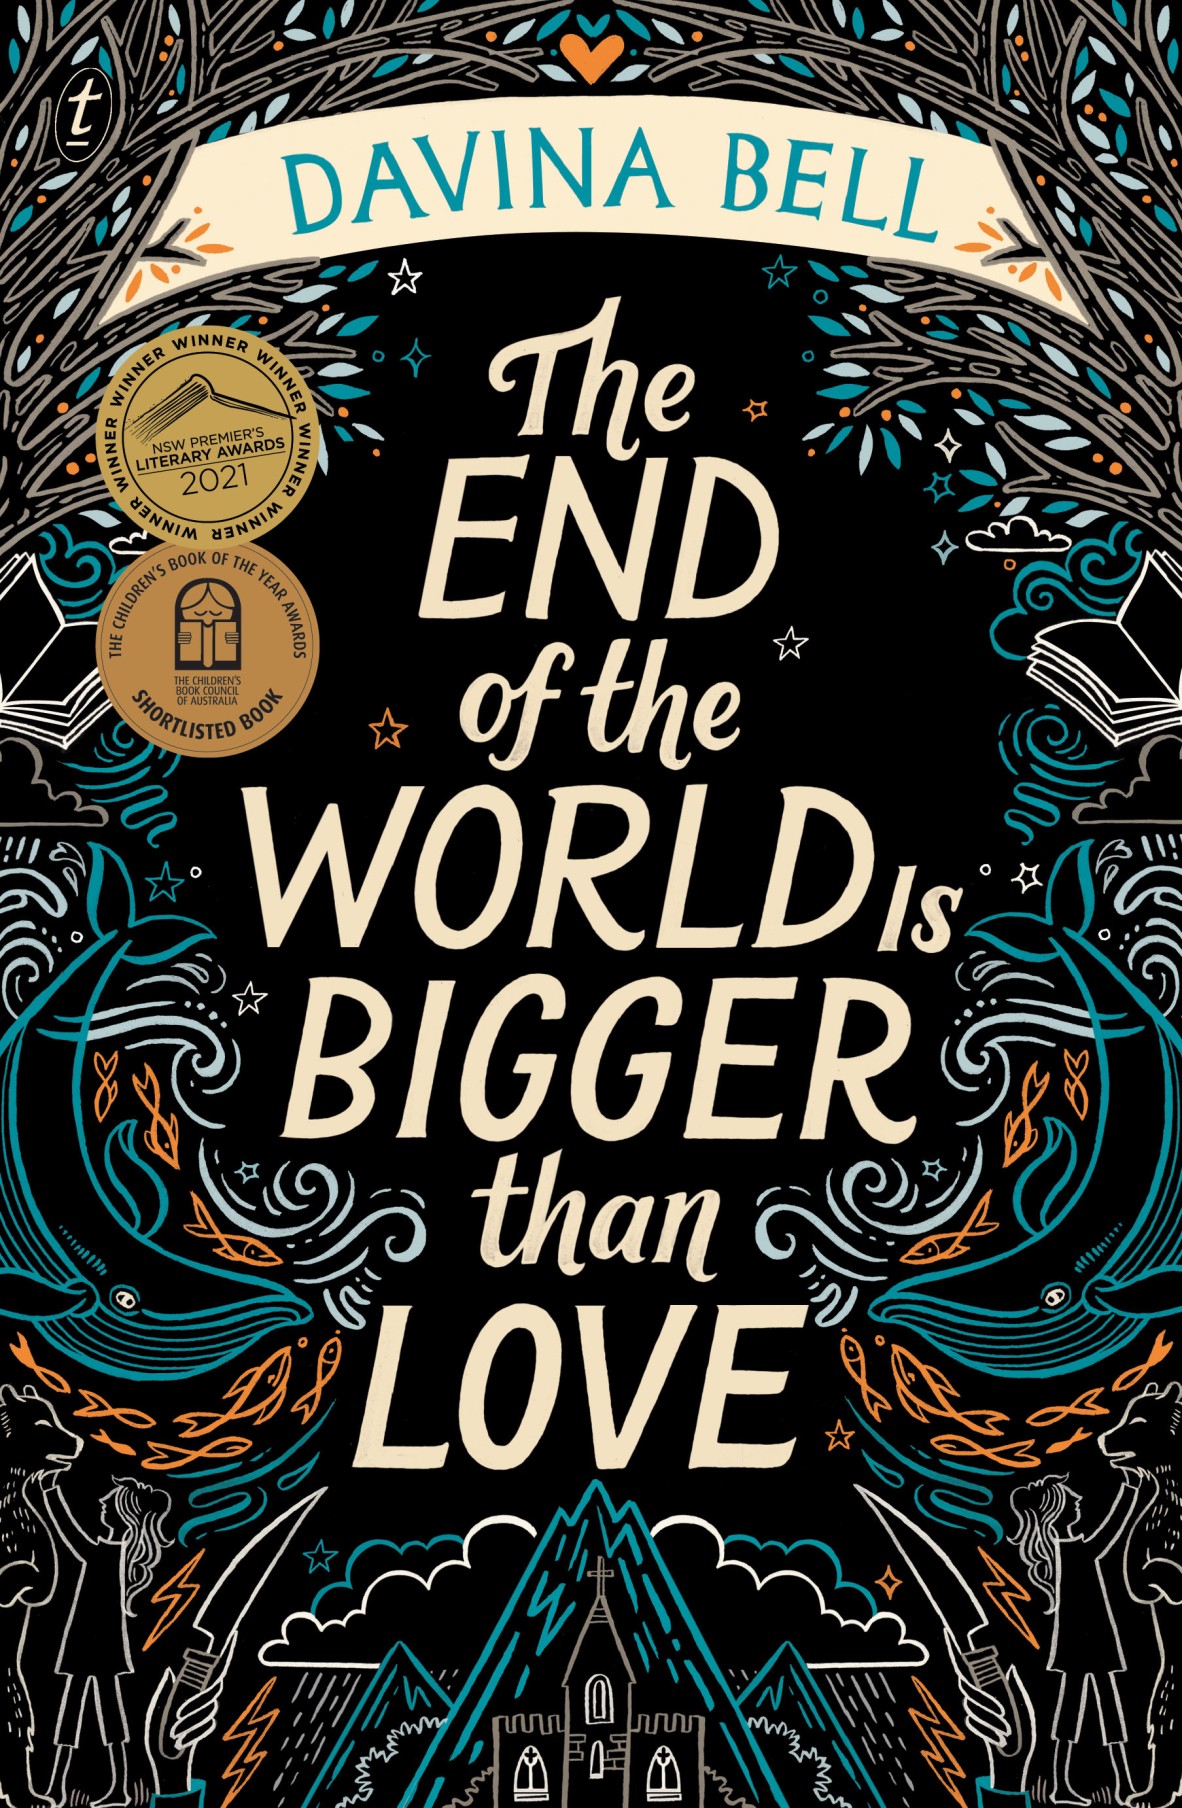 The End of the World is Bigger than Love by Davina Bell Text Publishing